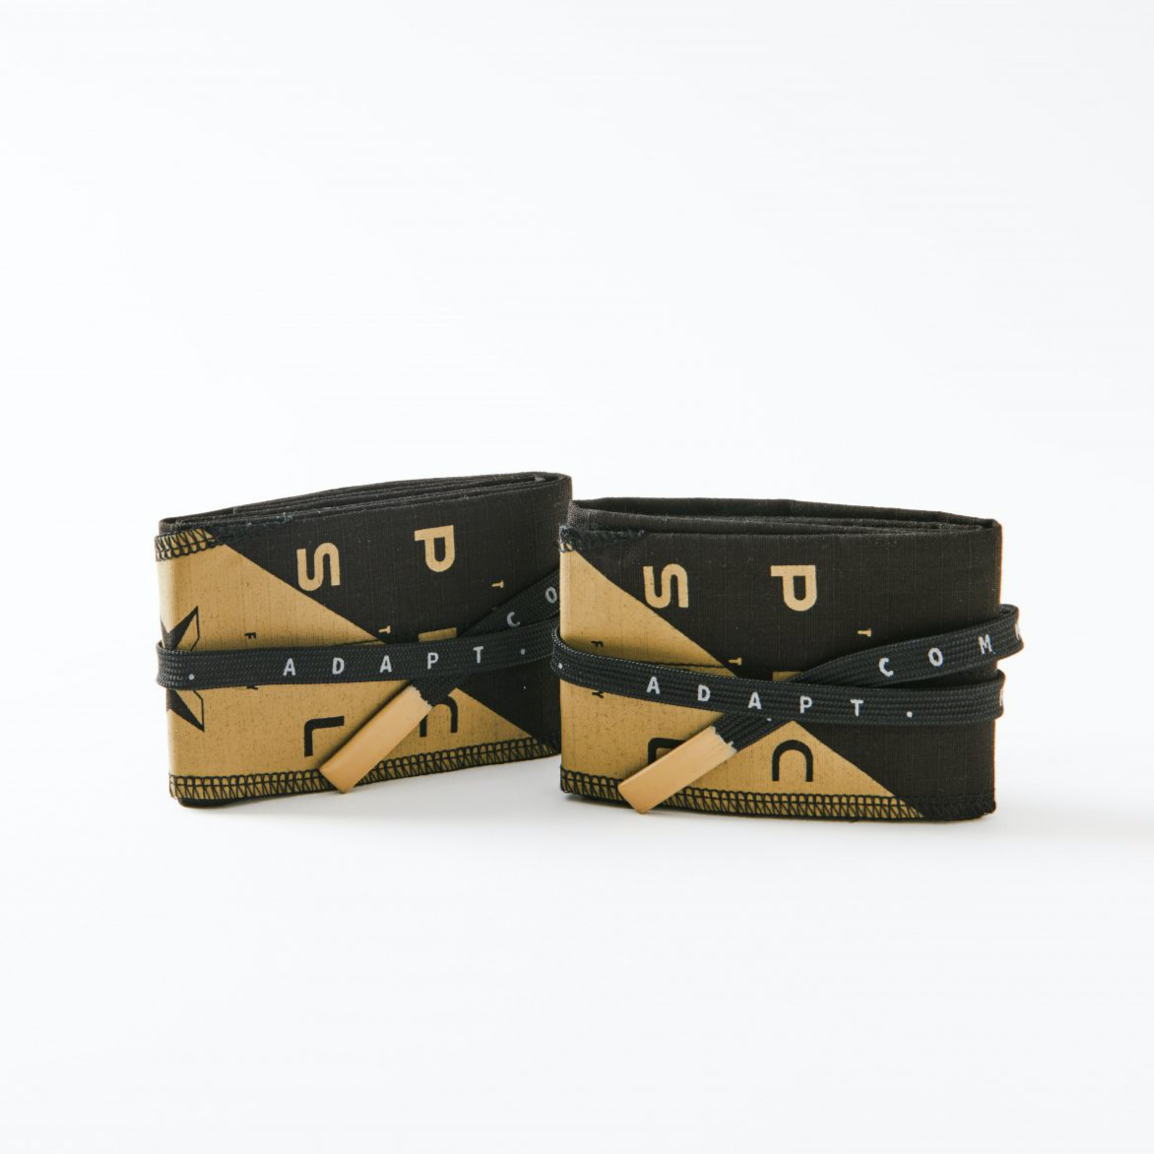 Picsil - Wrist Wraps – THE WOD GUYS FOR SPORT EQUIPMENT TRADING CO. L.L.C